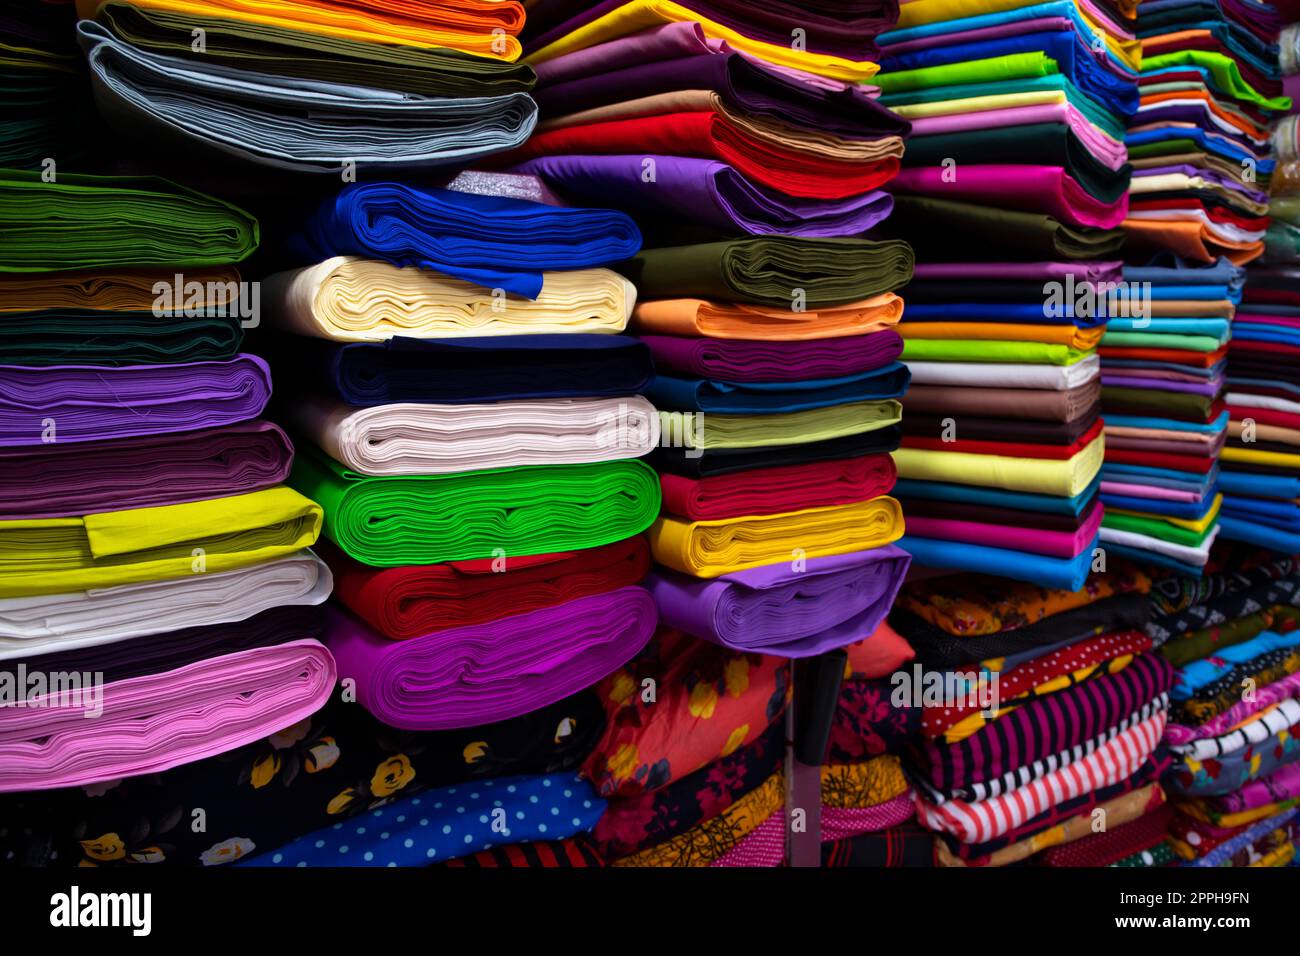 Artistic variety shade tone colors Textile Fabrics stacked on retail Shop Shelf to sale Stock Photo